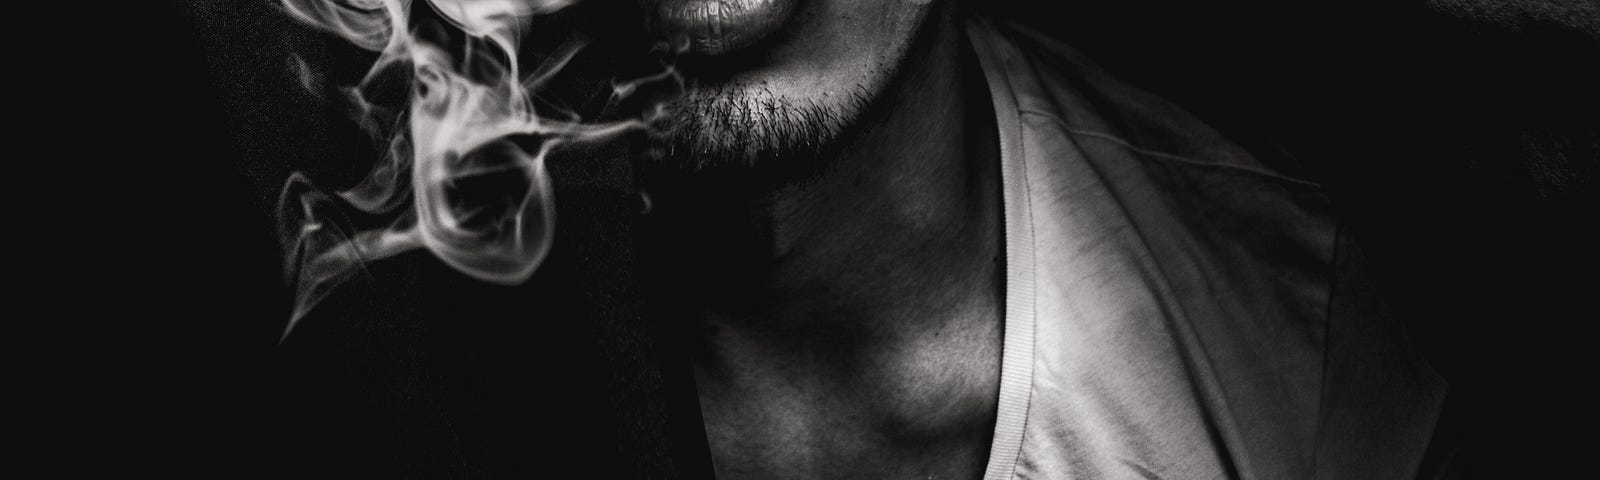 closeup of man in tank top with smoke coming out of his mouth